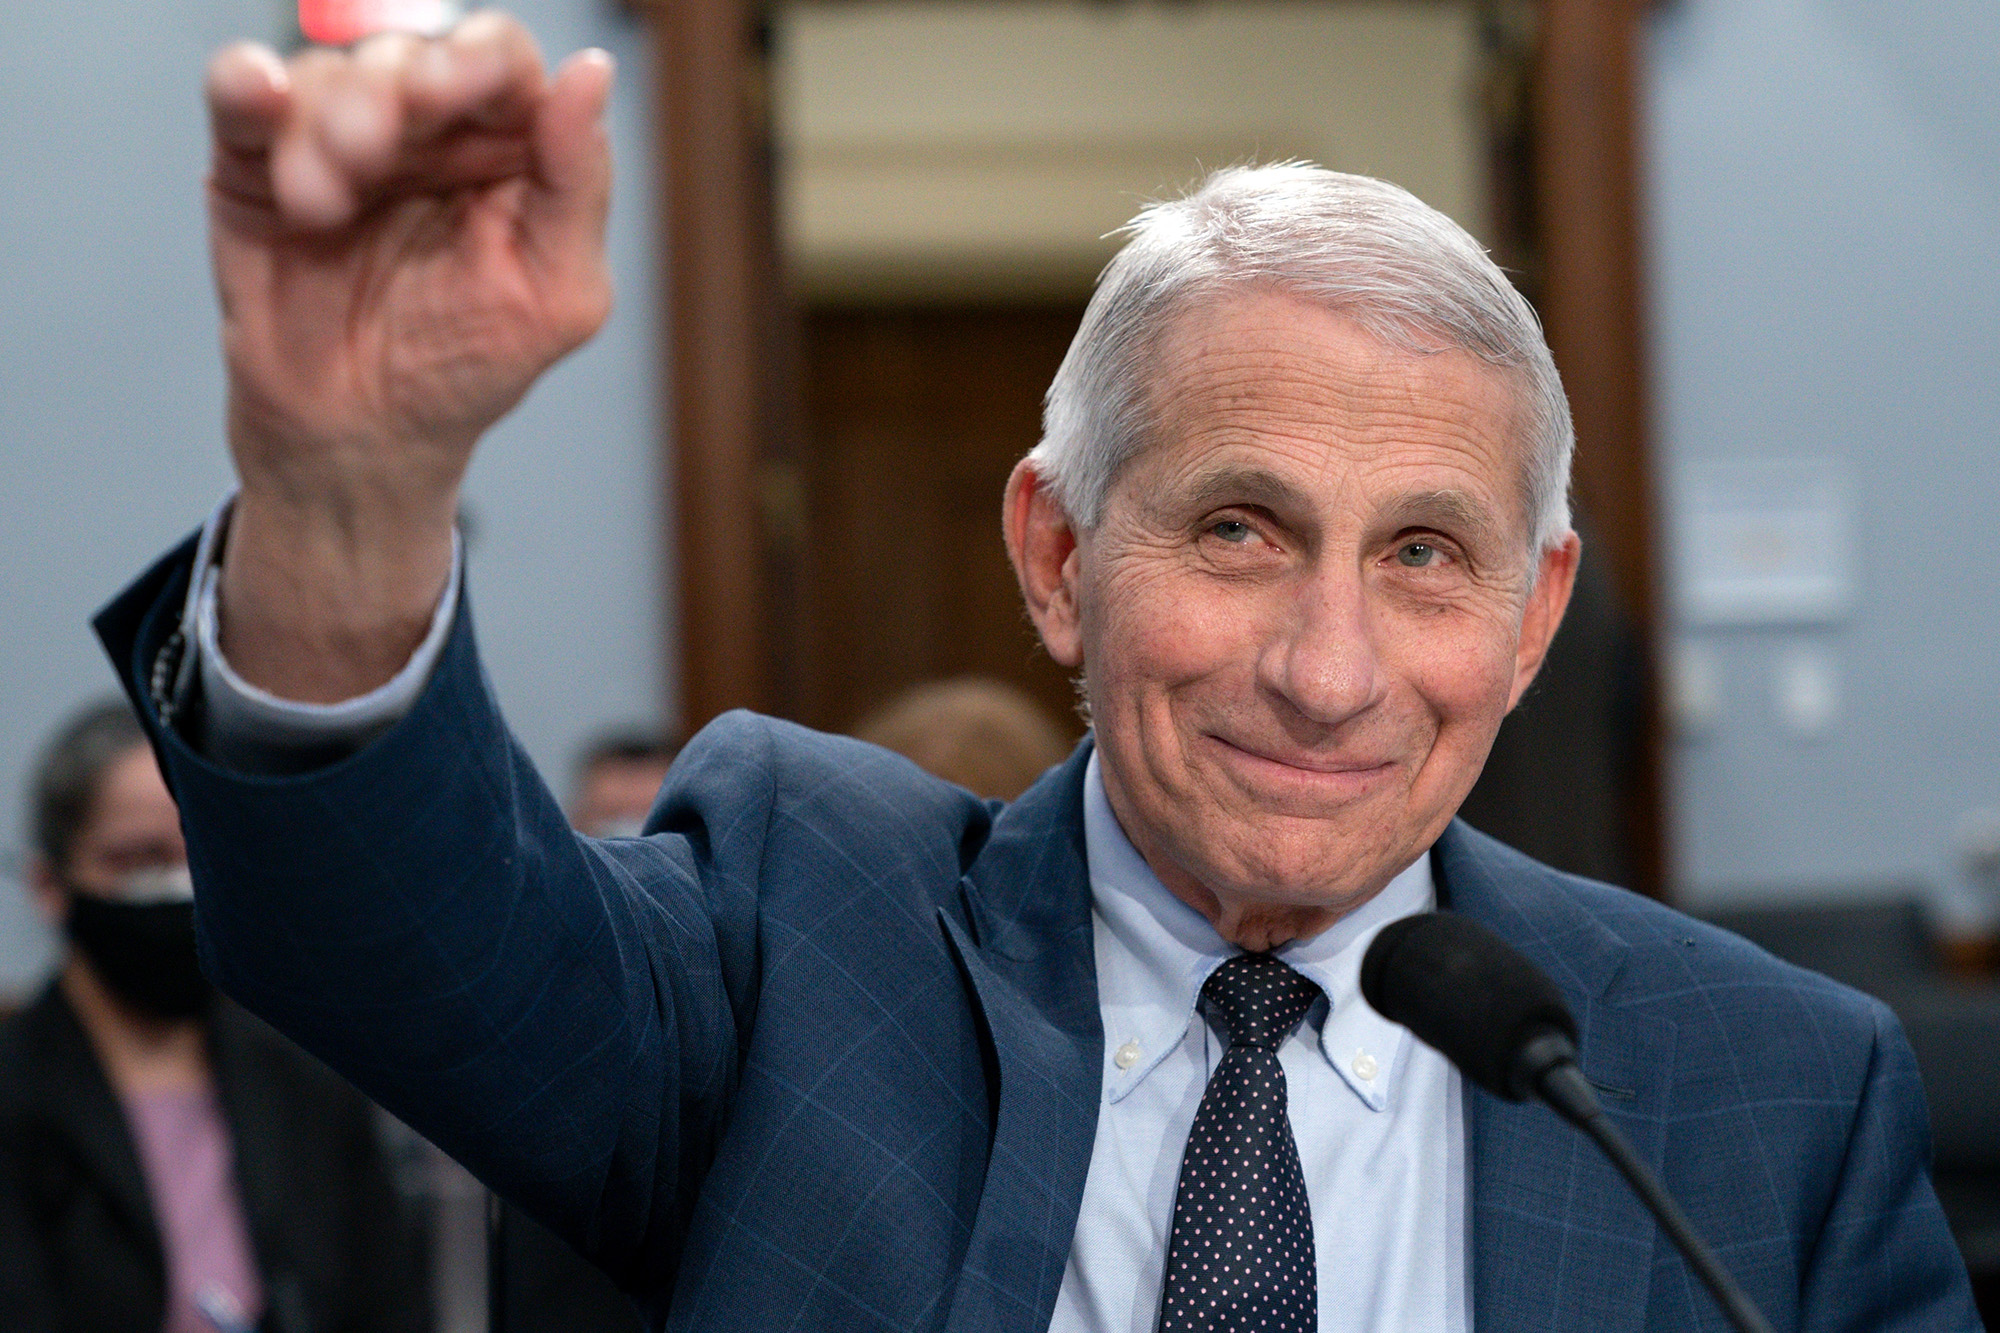 Dr. Anthony Fauci, Director of the National Institute of Allergy and Infectious Diseases, waves hello to the committee at the start of a House Committee on Appropriations subcommittee on Labor, Health and Human Services, Education, and Related Agencies hearing, about the budget request for the National Institutes of Health, May 11, 2022, on Capitol Hill in Washington.